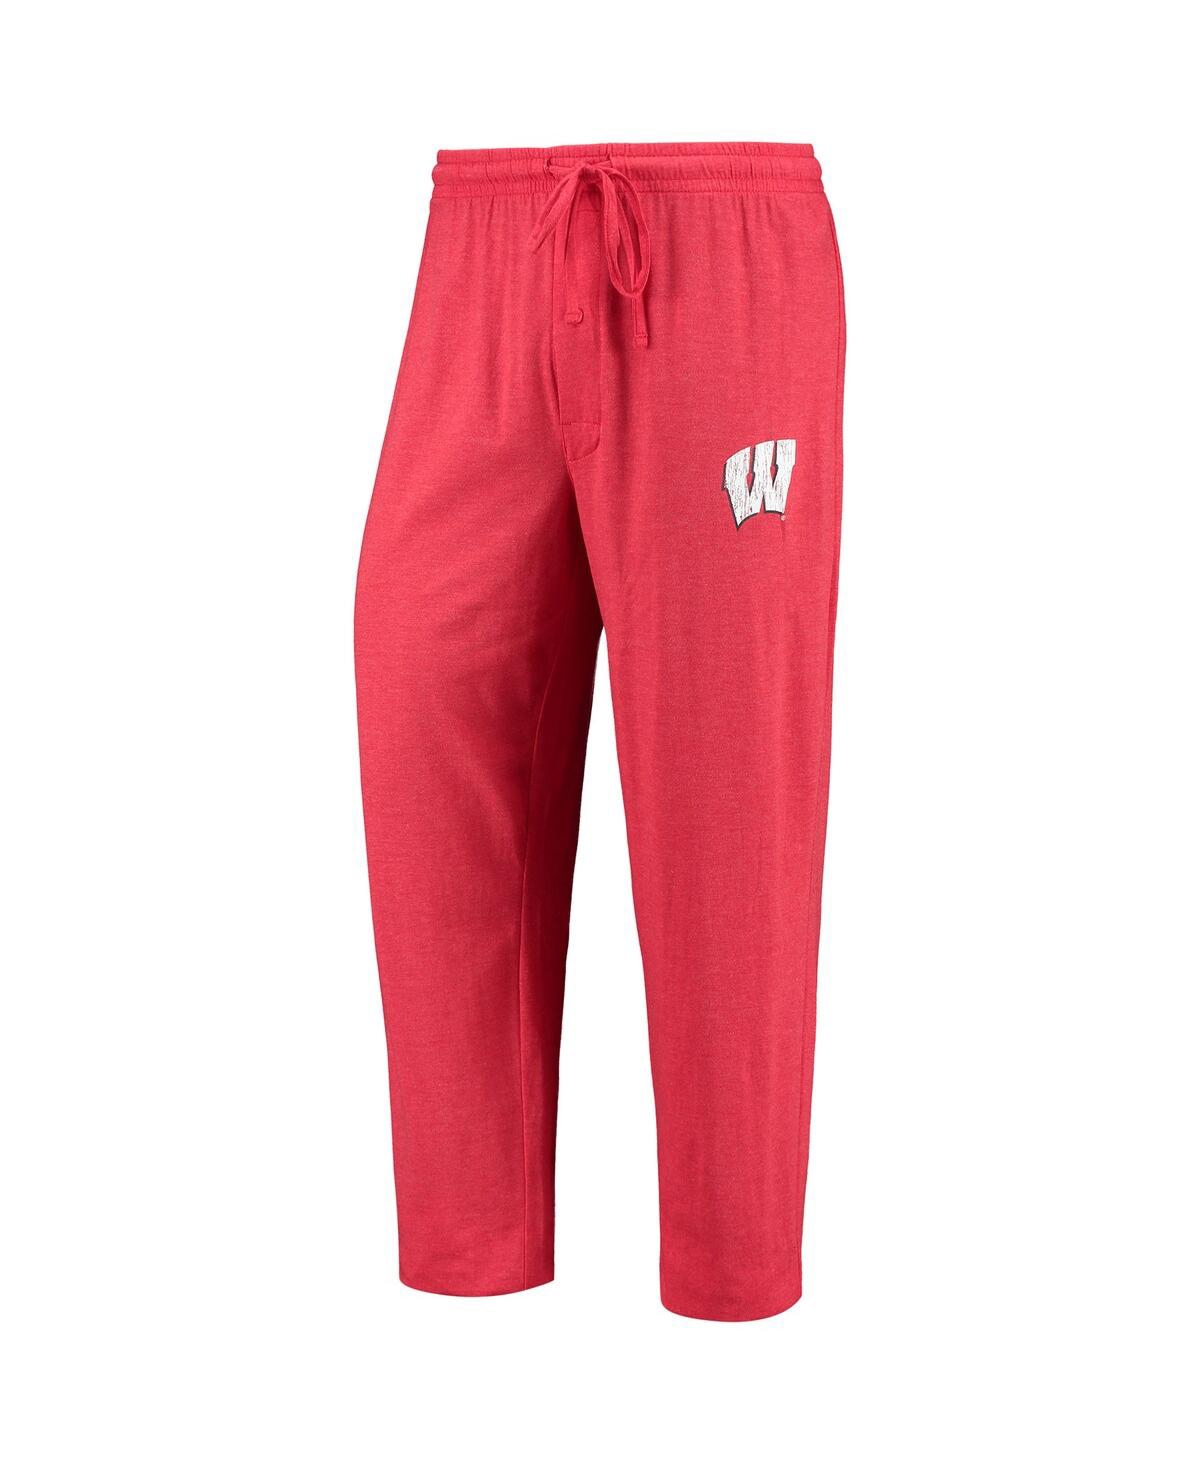 Shop Concepts Sport Men's  Red And Heathered Charcoal Wisconsin Badgers Meter Long Sleeve T-shirt And Pant In Red,heathered Charcoal